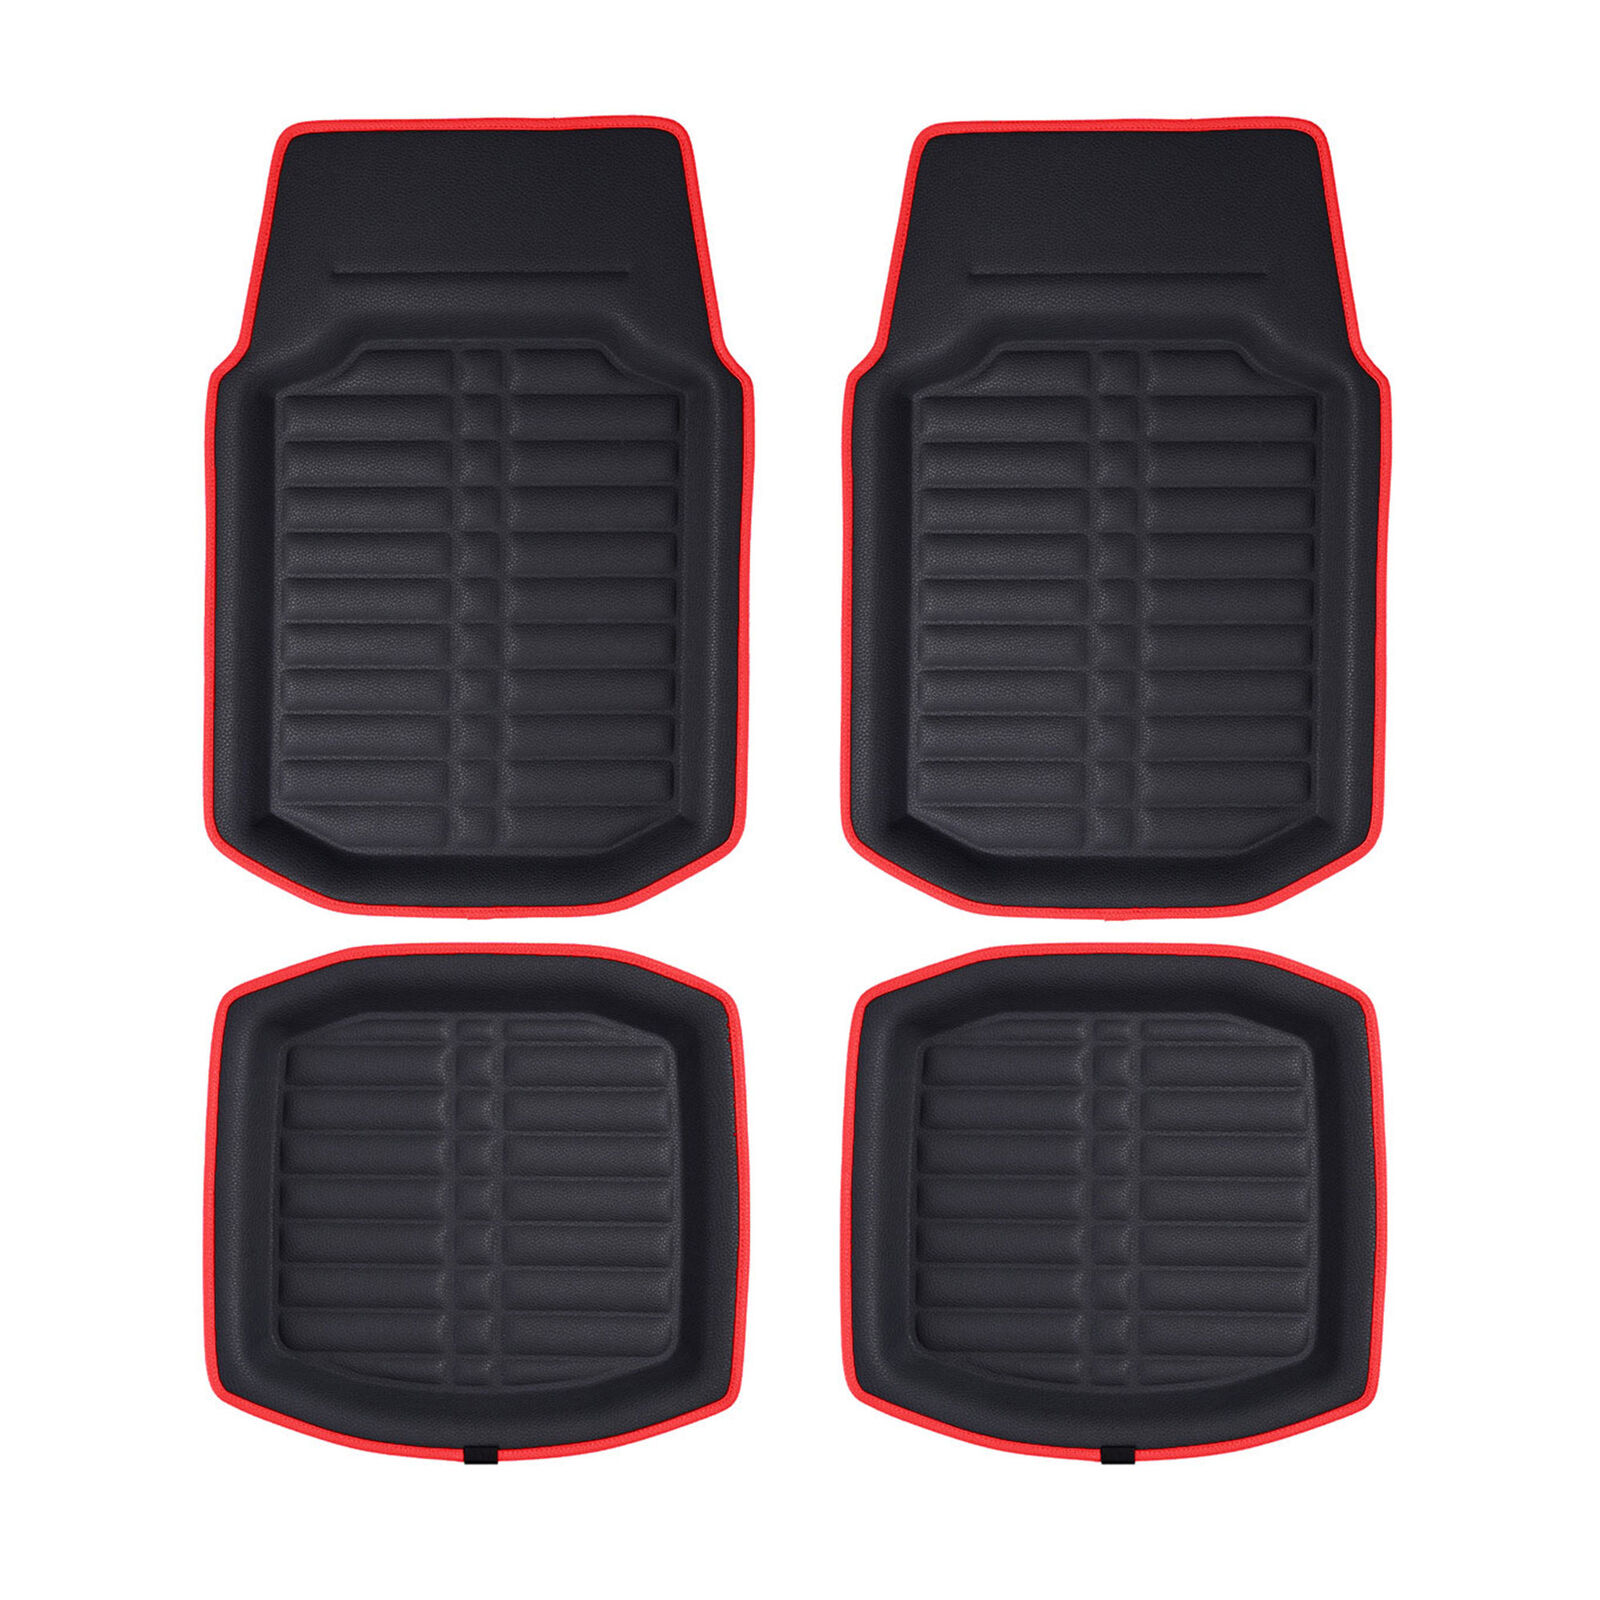 FH Group PU Leather Floor Mats for Auto Car SUV Van Deep Tray Waterproof - Red